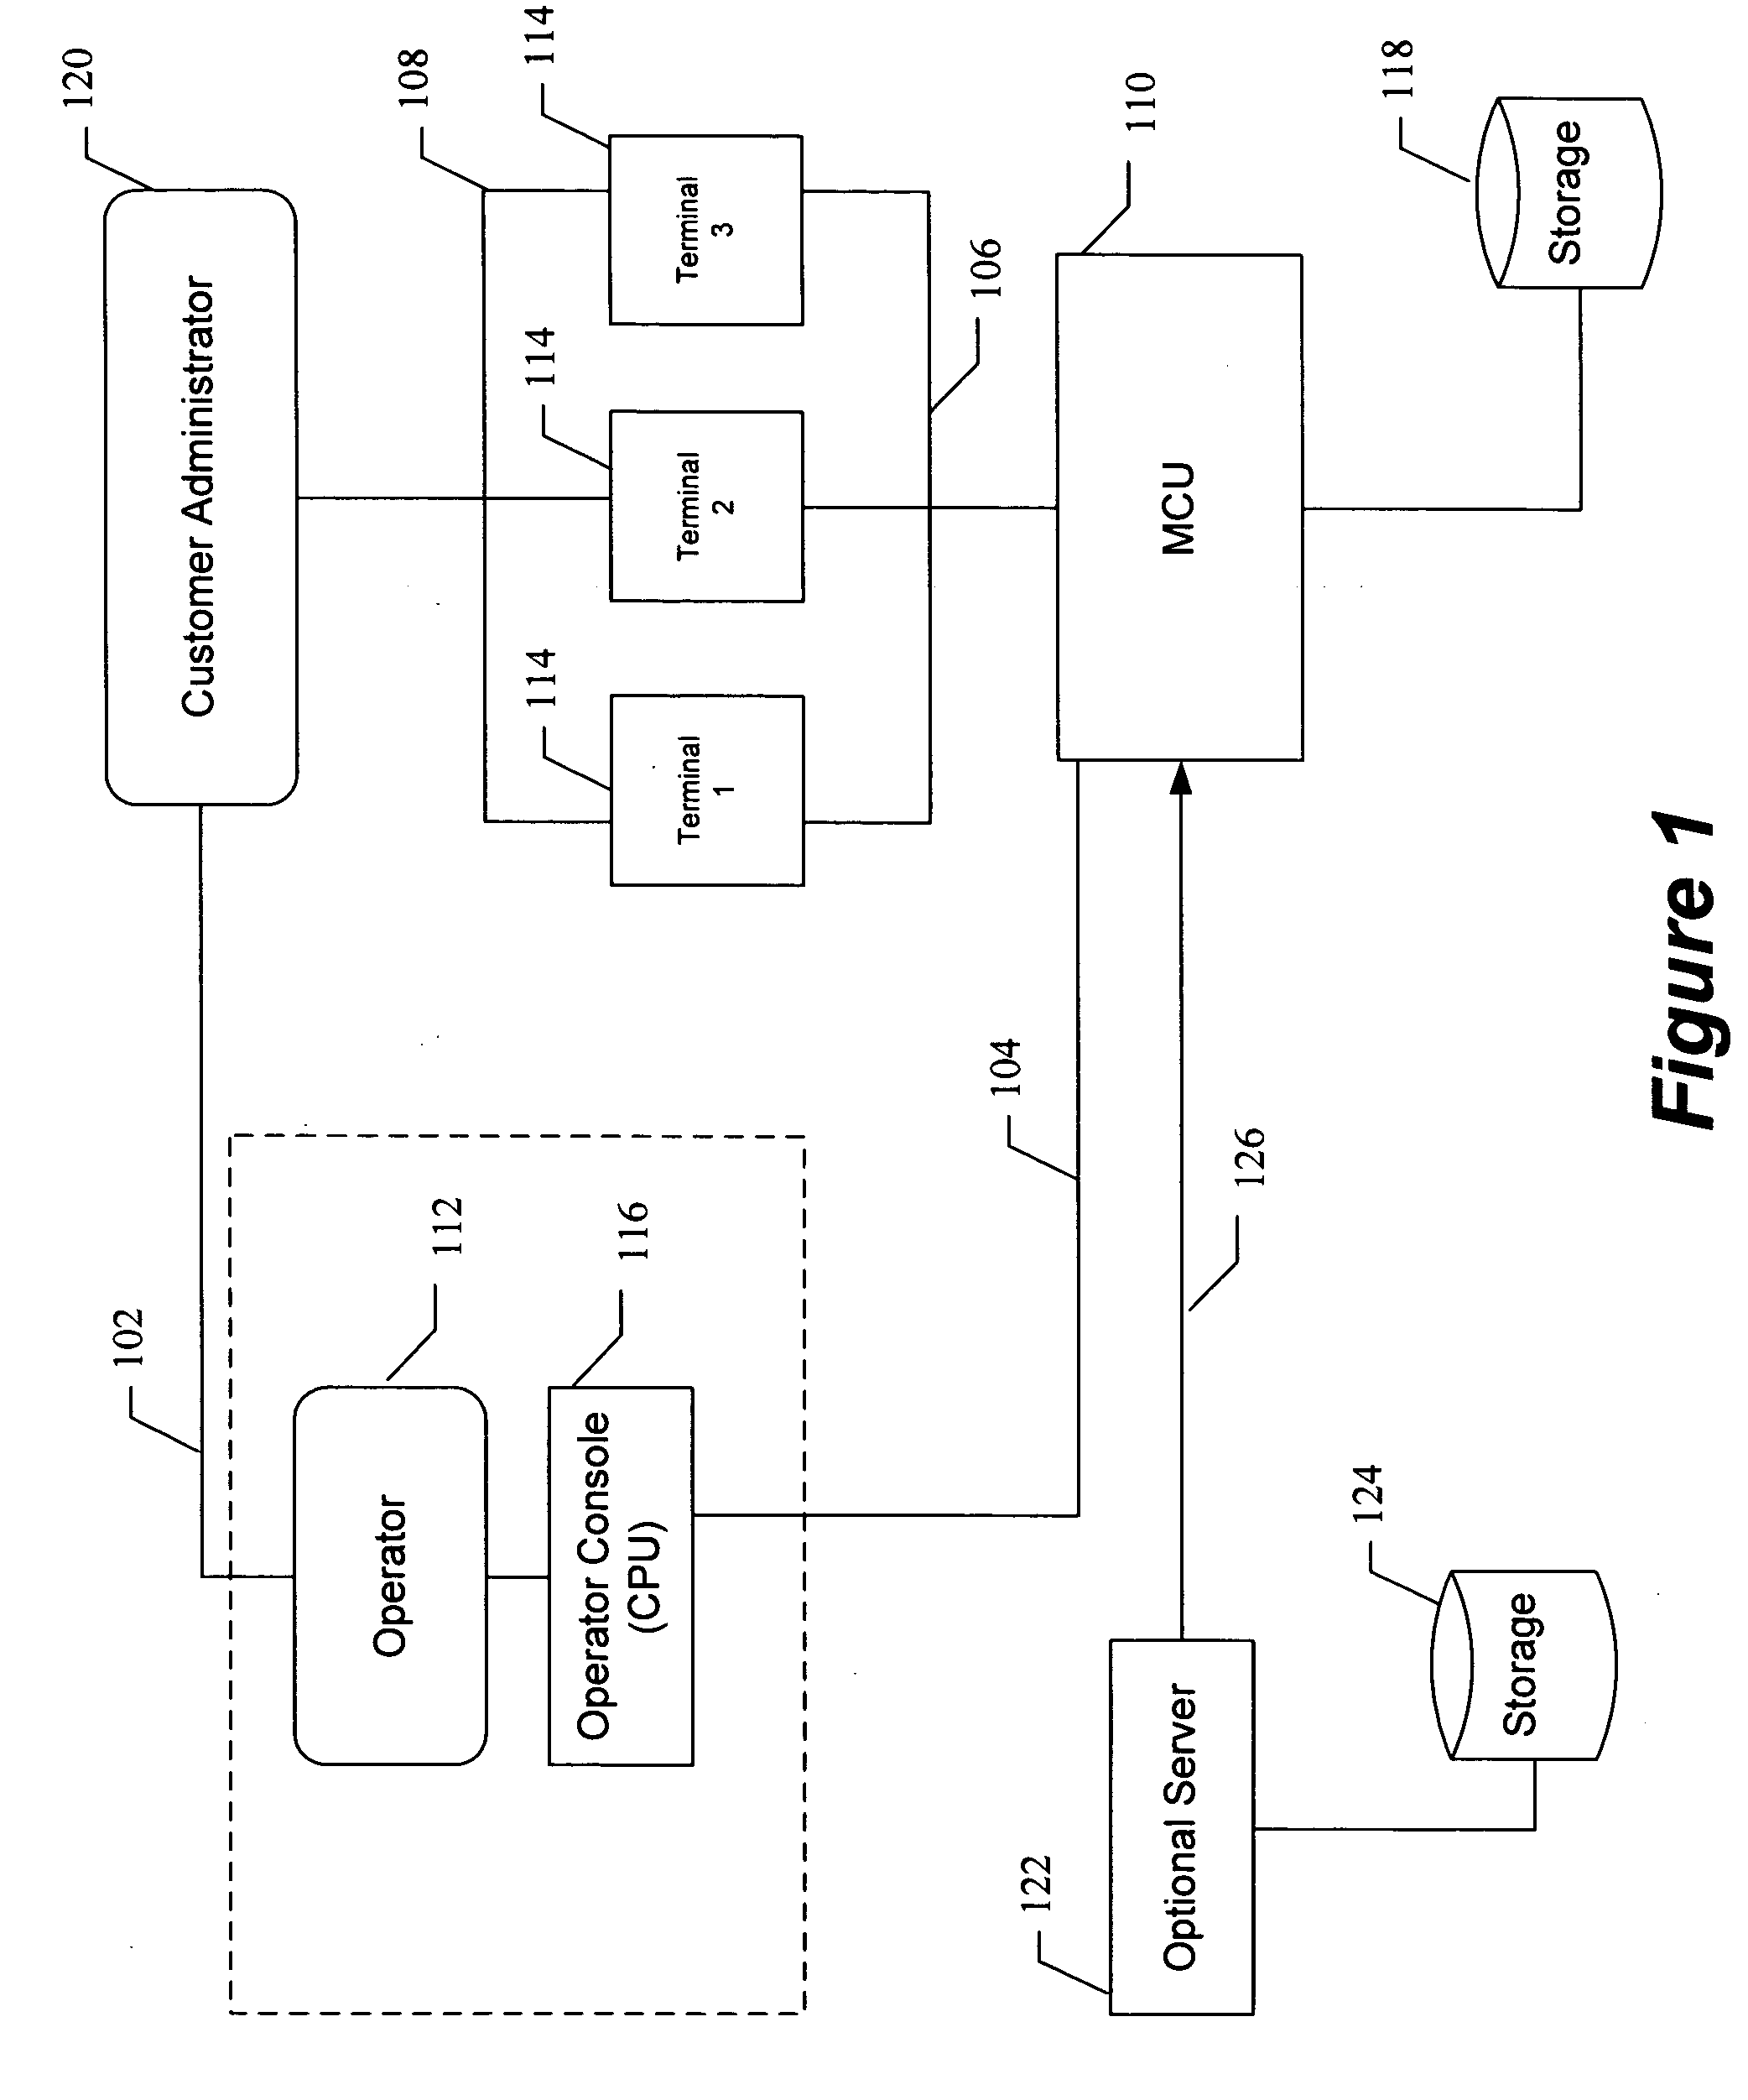 System and method for providing reservationless third party meeting rooms